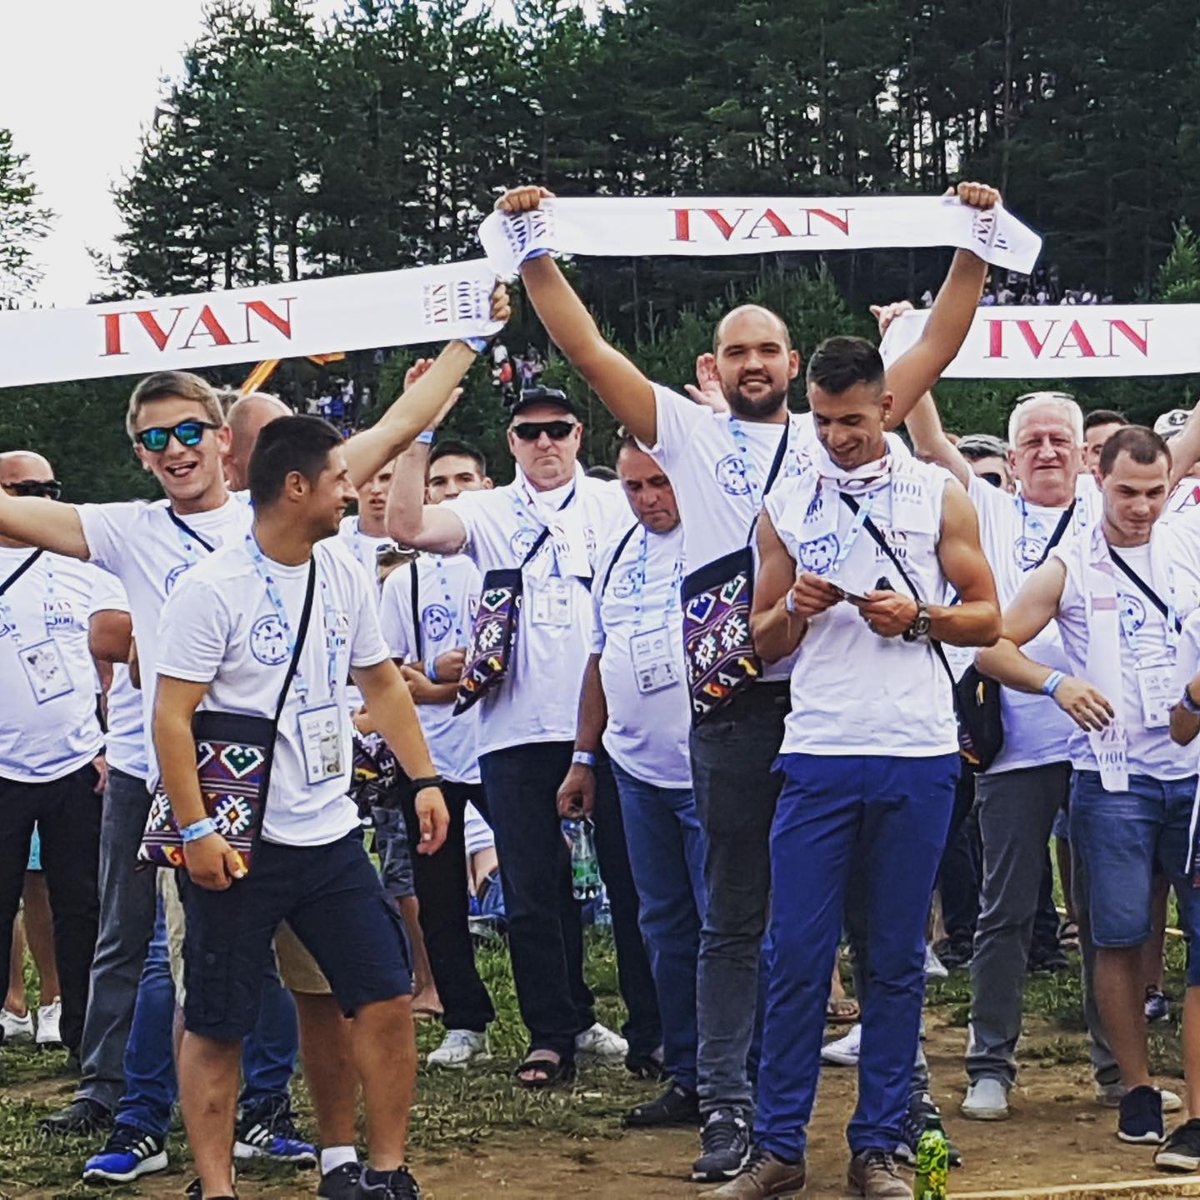 The largest gathering of people with the same first name is 2325 people named Ivan, achieved in Kupres, Bosnia and Herzegovina back in 2017. 

Who can break the record next?